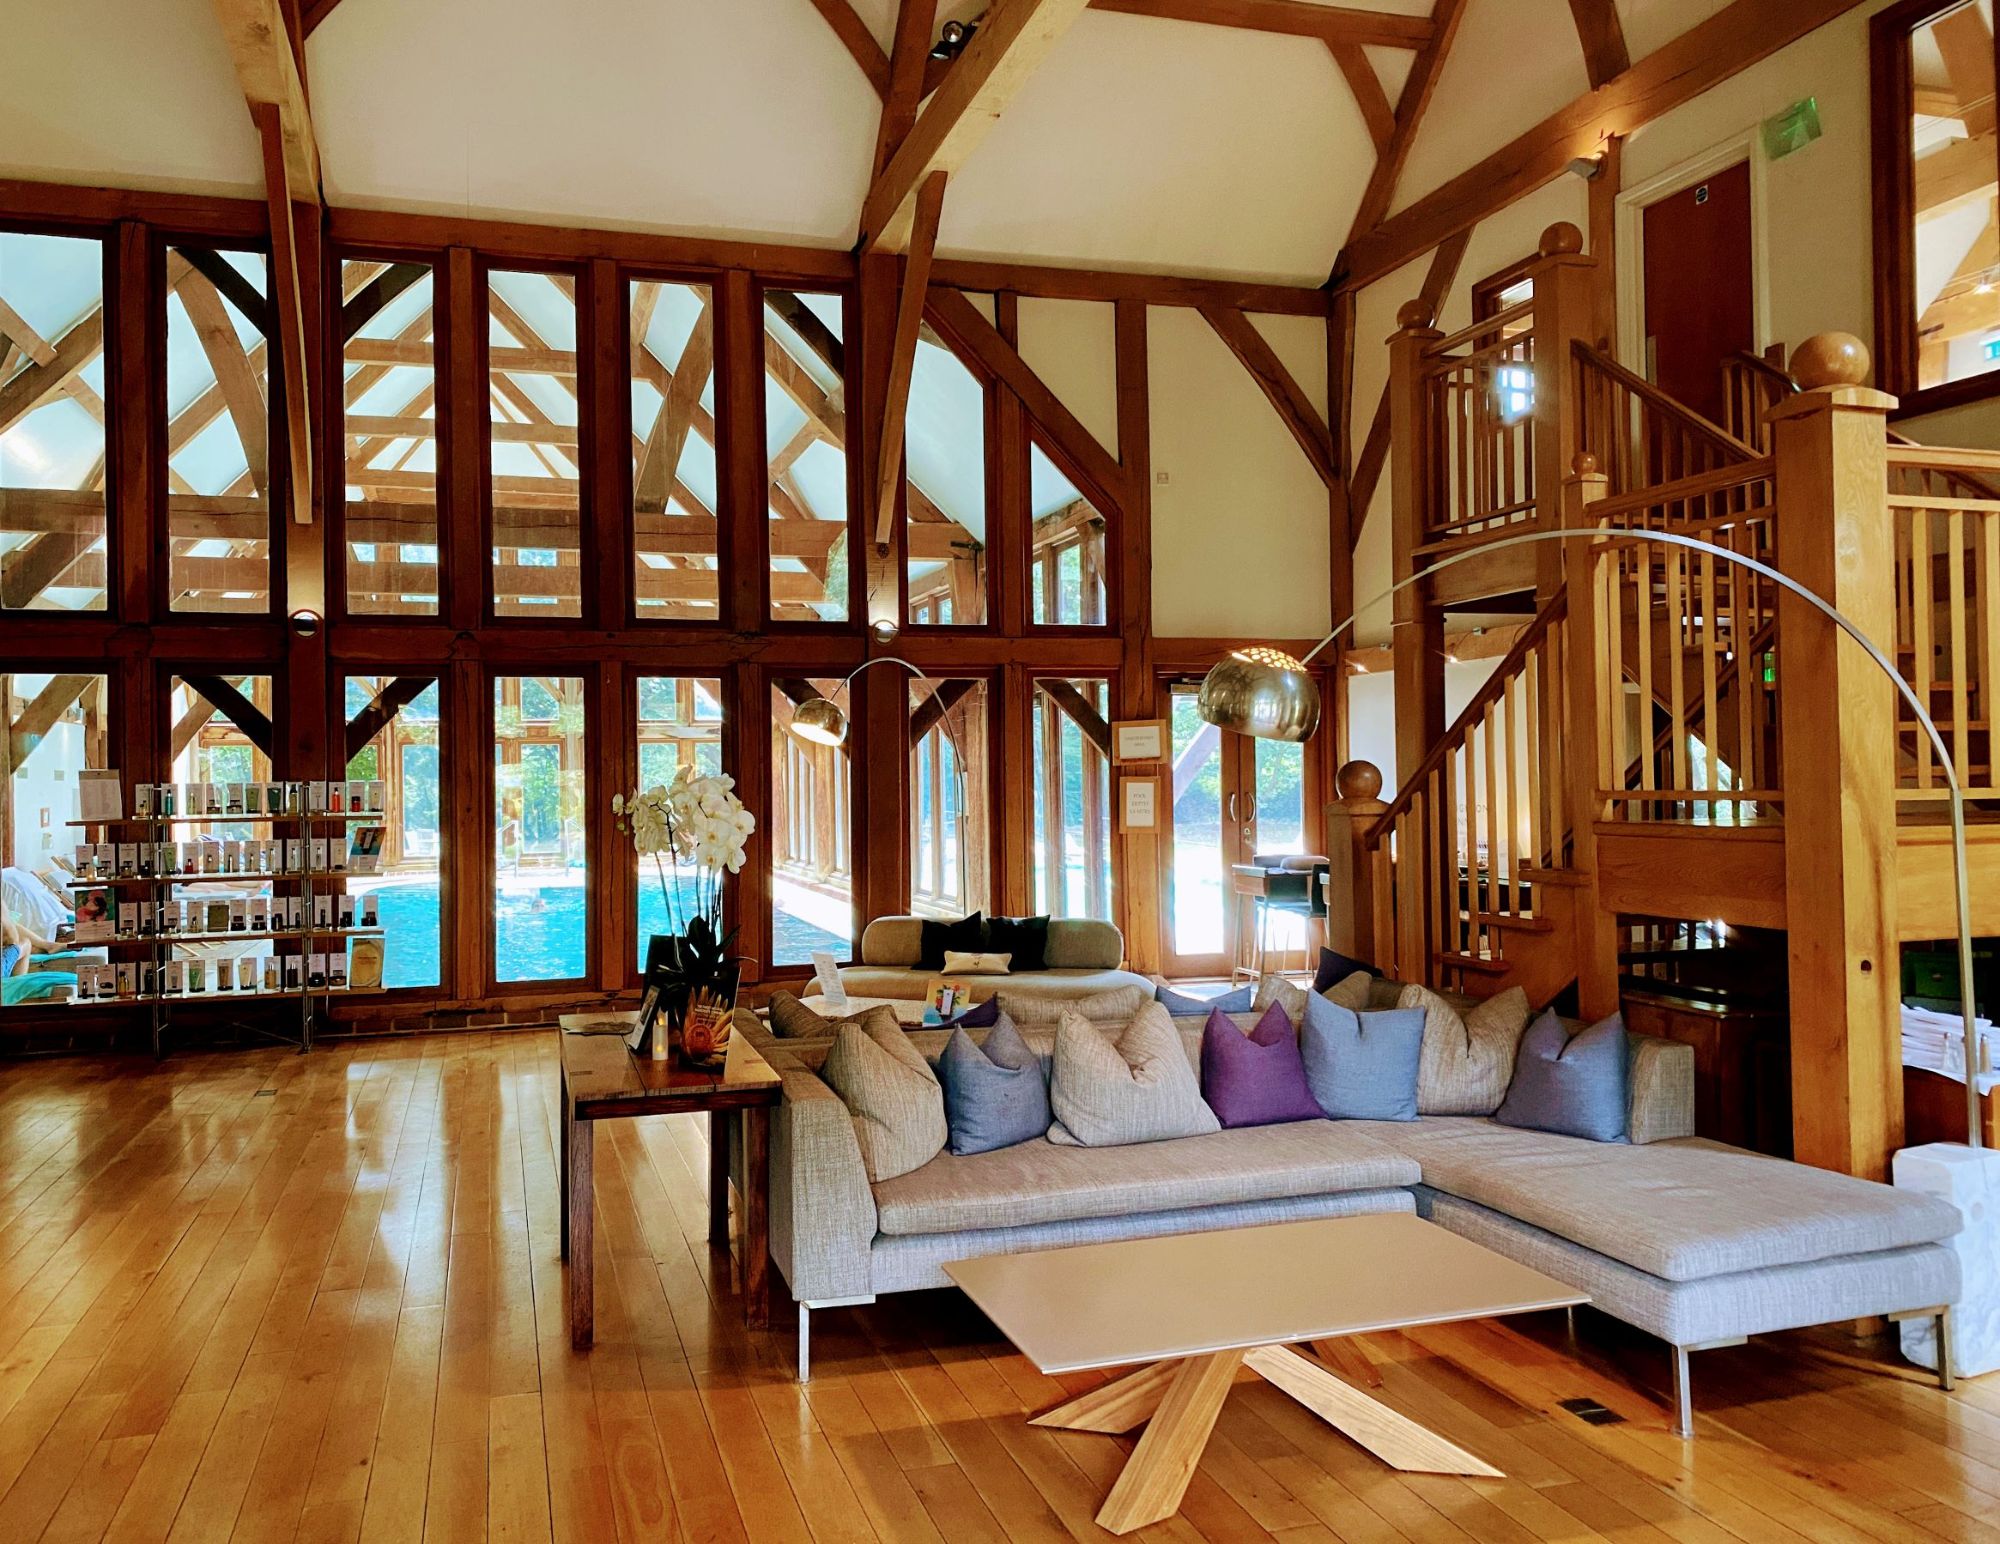 Beautiful entrance hall with oak beams and oak surround windows through to an indoor swimming pool